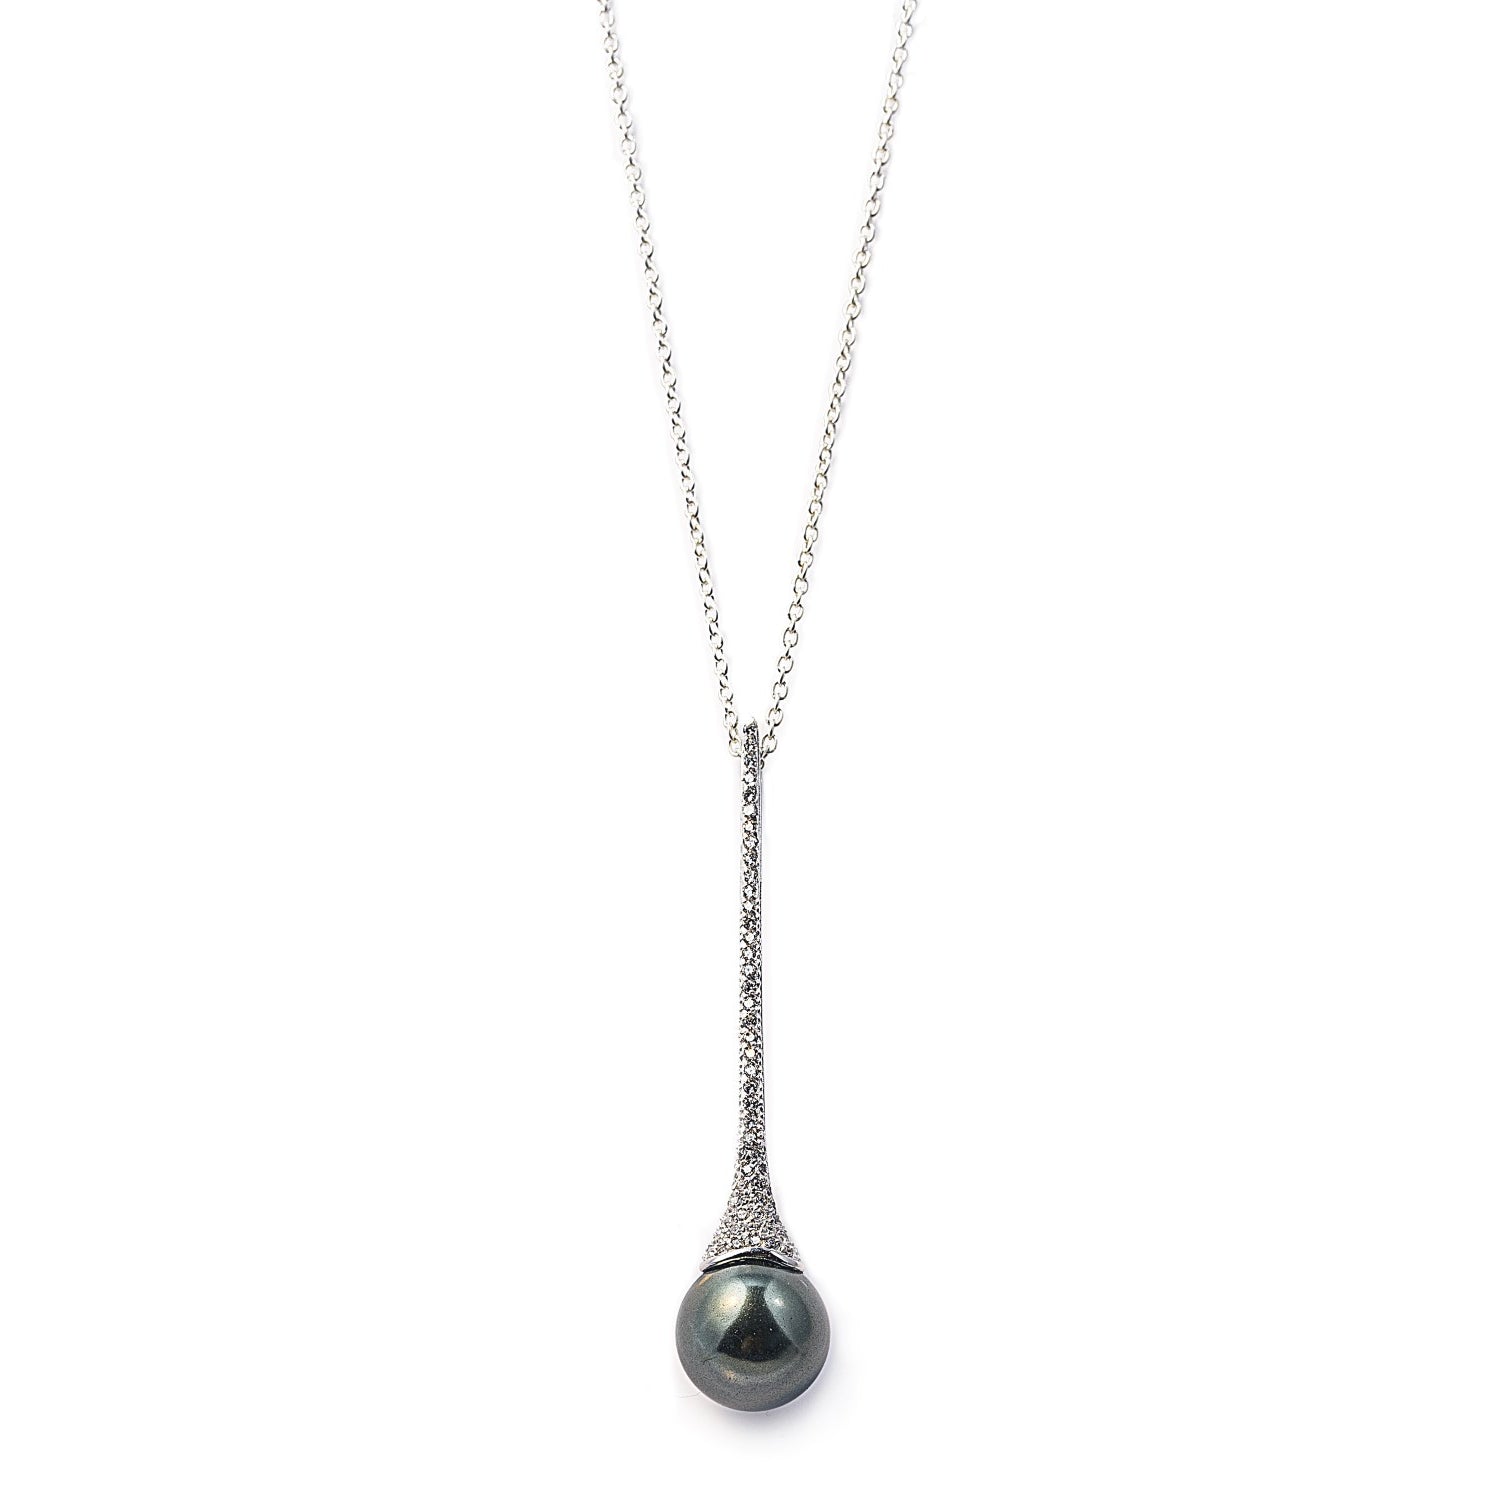 The Pearl Spear Necklace is a stunning ocean inspired spear pendant encrusted with Cubic Zirconia stones holding a single black pearl. Worldwide shipping. Affordable luxury jewellery by Bellagio & Co.